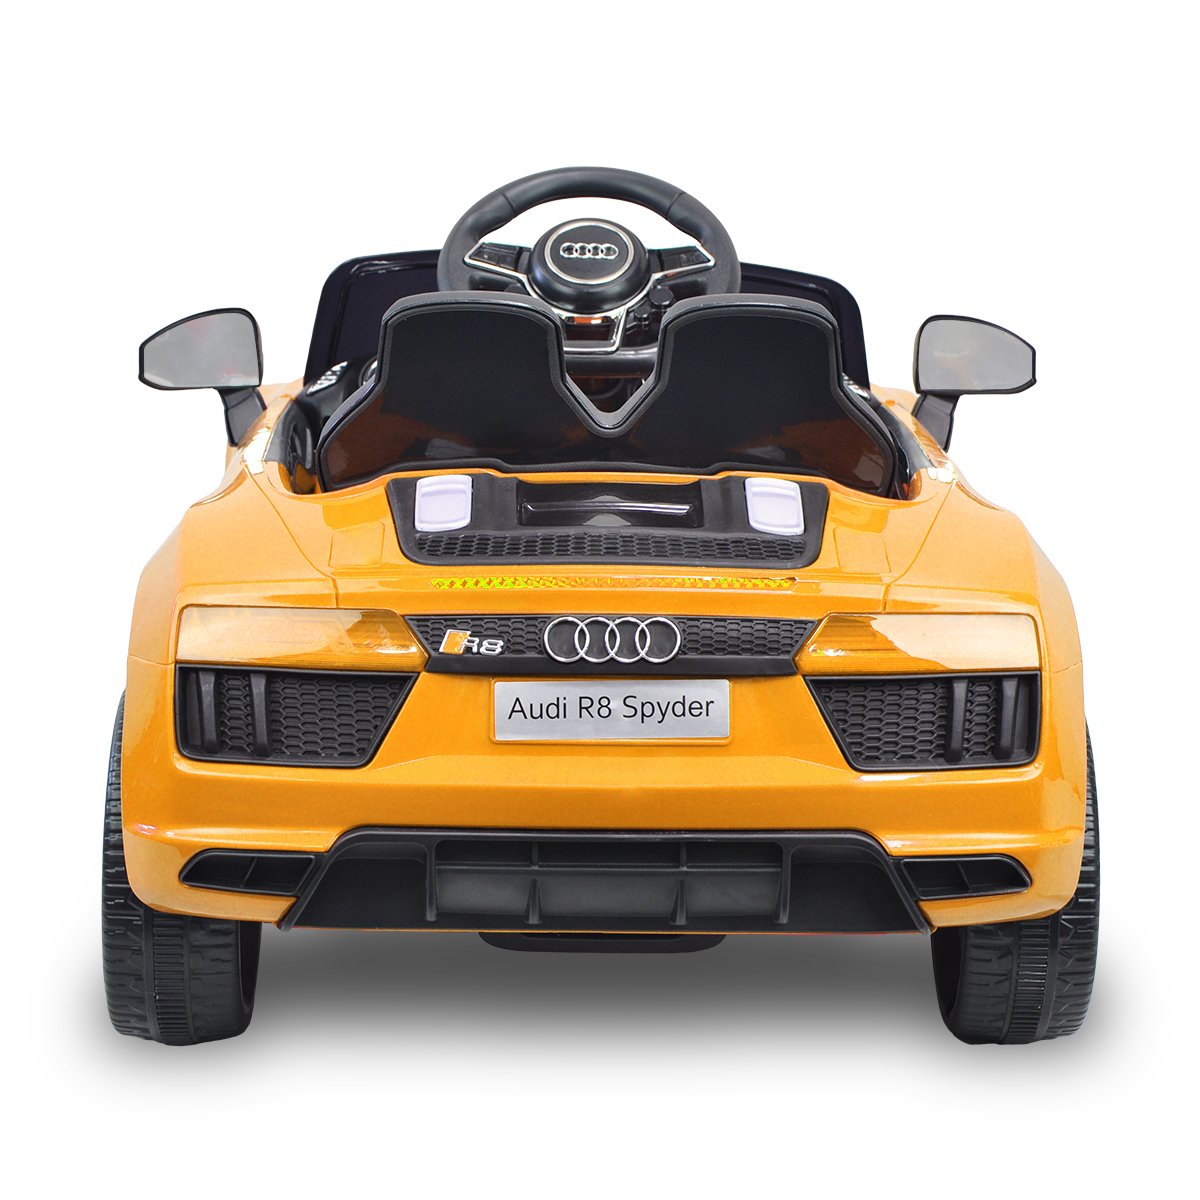 R8 Spyder Audi Licensed Kids Electric Ride On Car Remote Control - Yellow